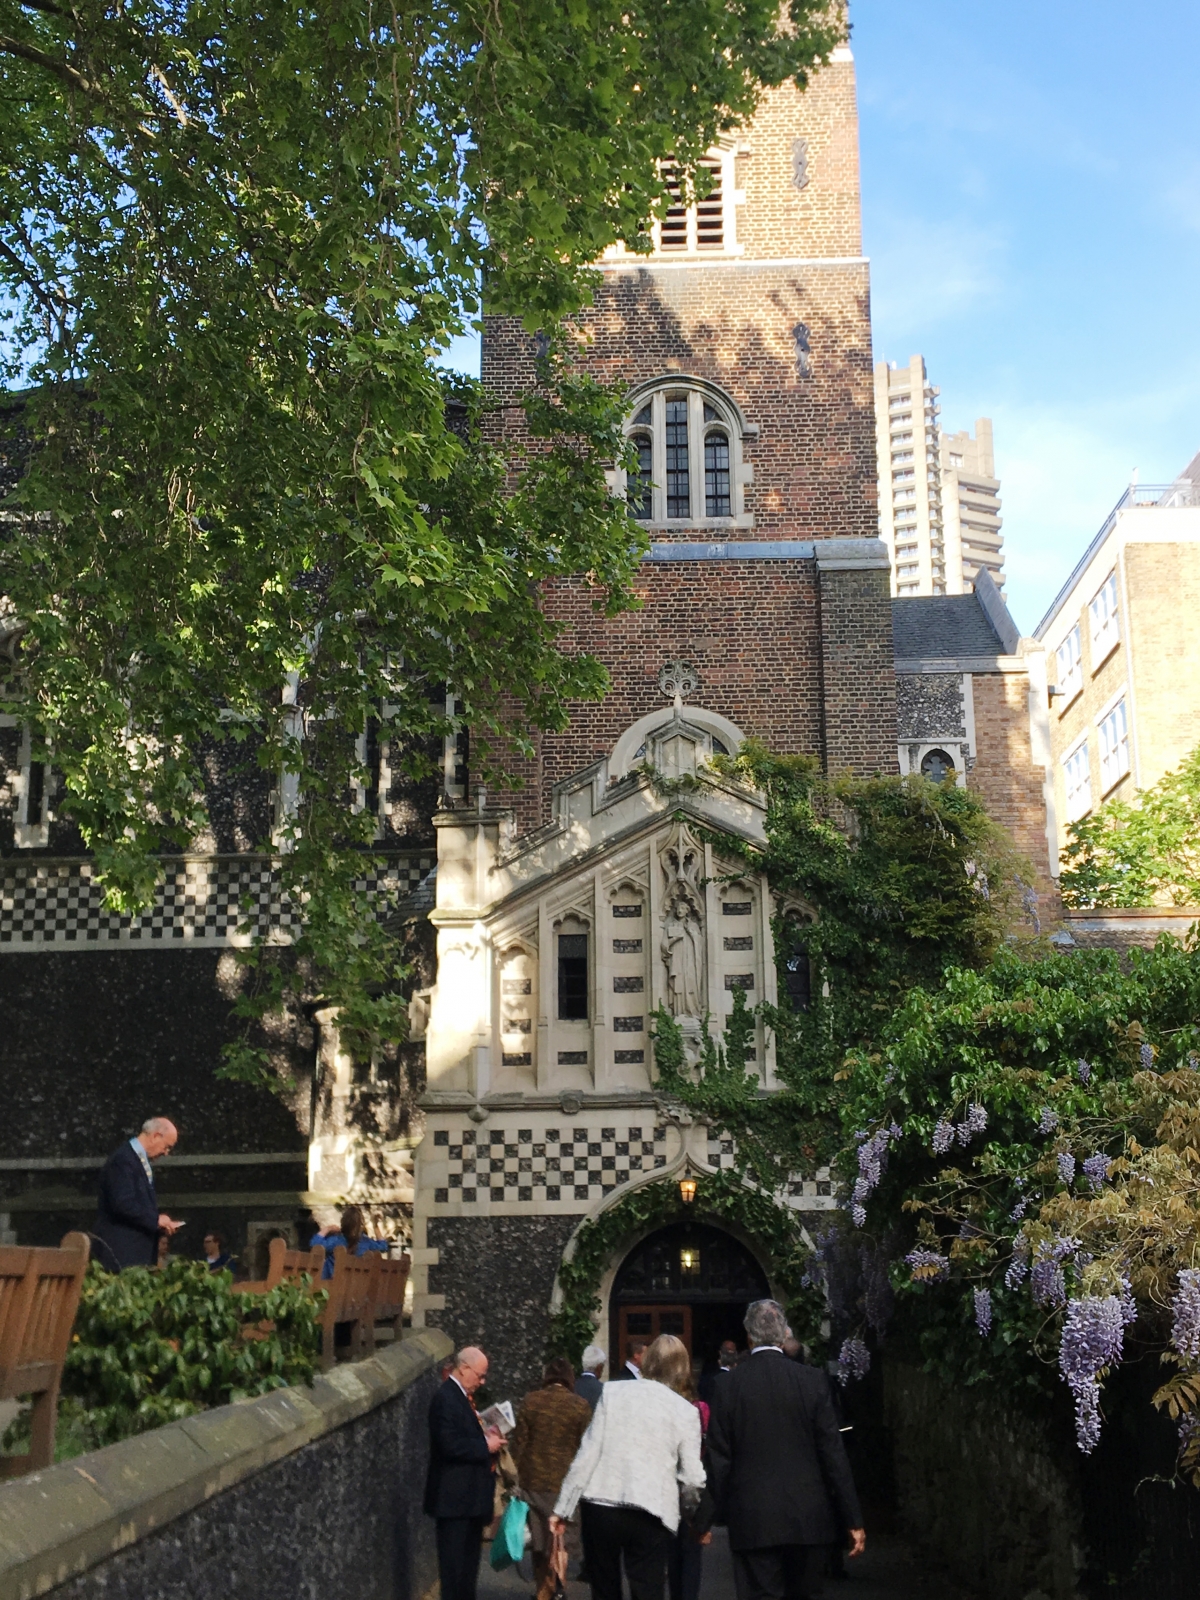 Barts View Day and Reception, Priory Church/Barts Great Hall 